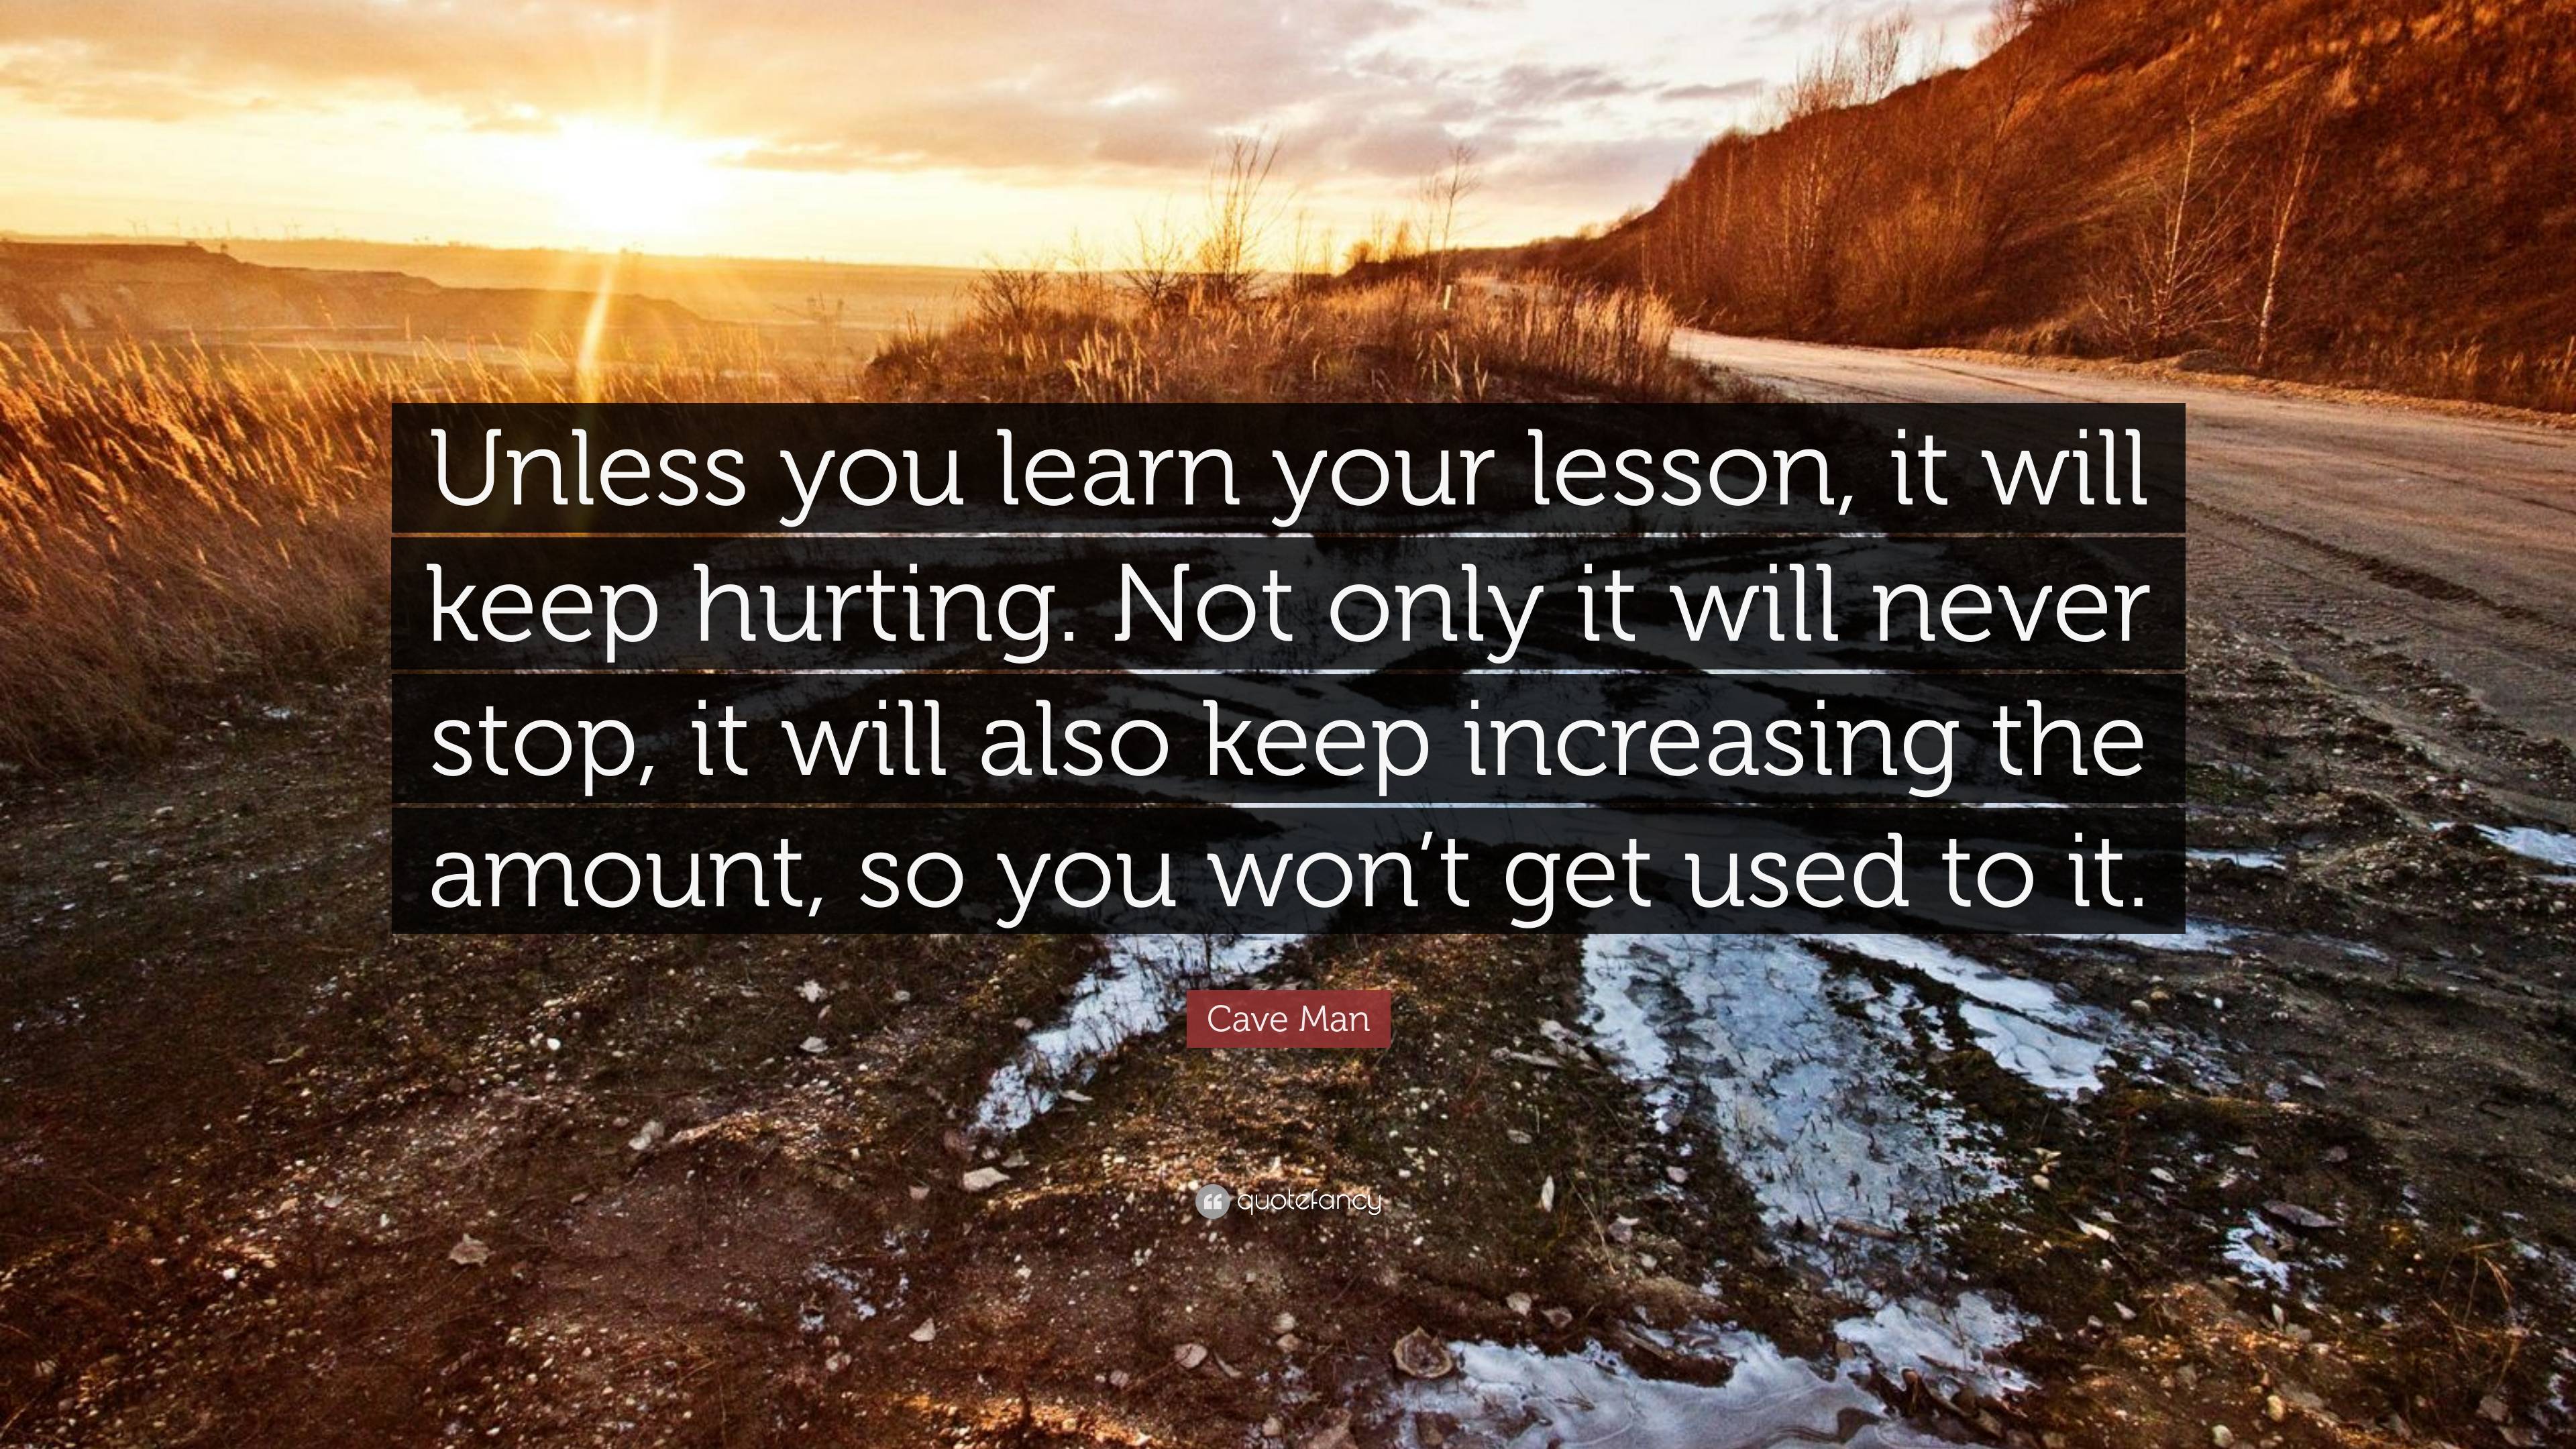 Have You Learned Your Lesson?